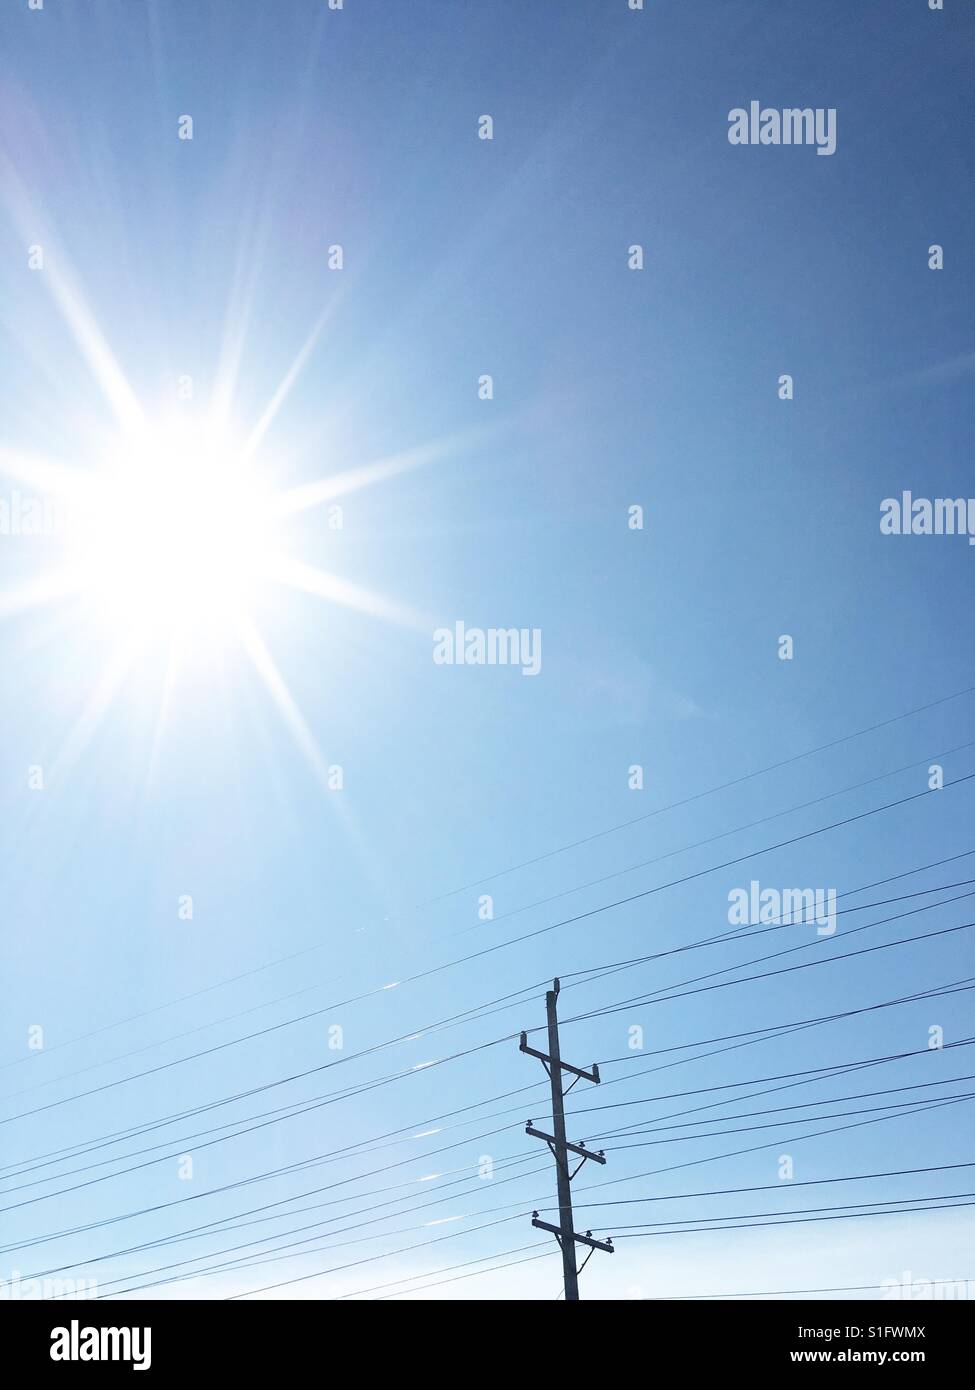 Sunburst and electrical wires Stock Photo